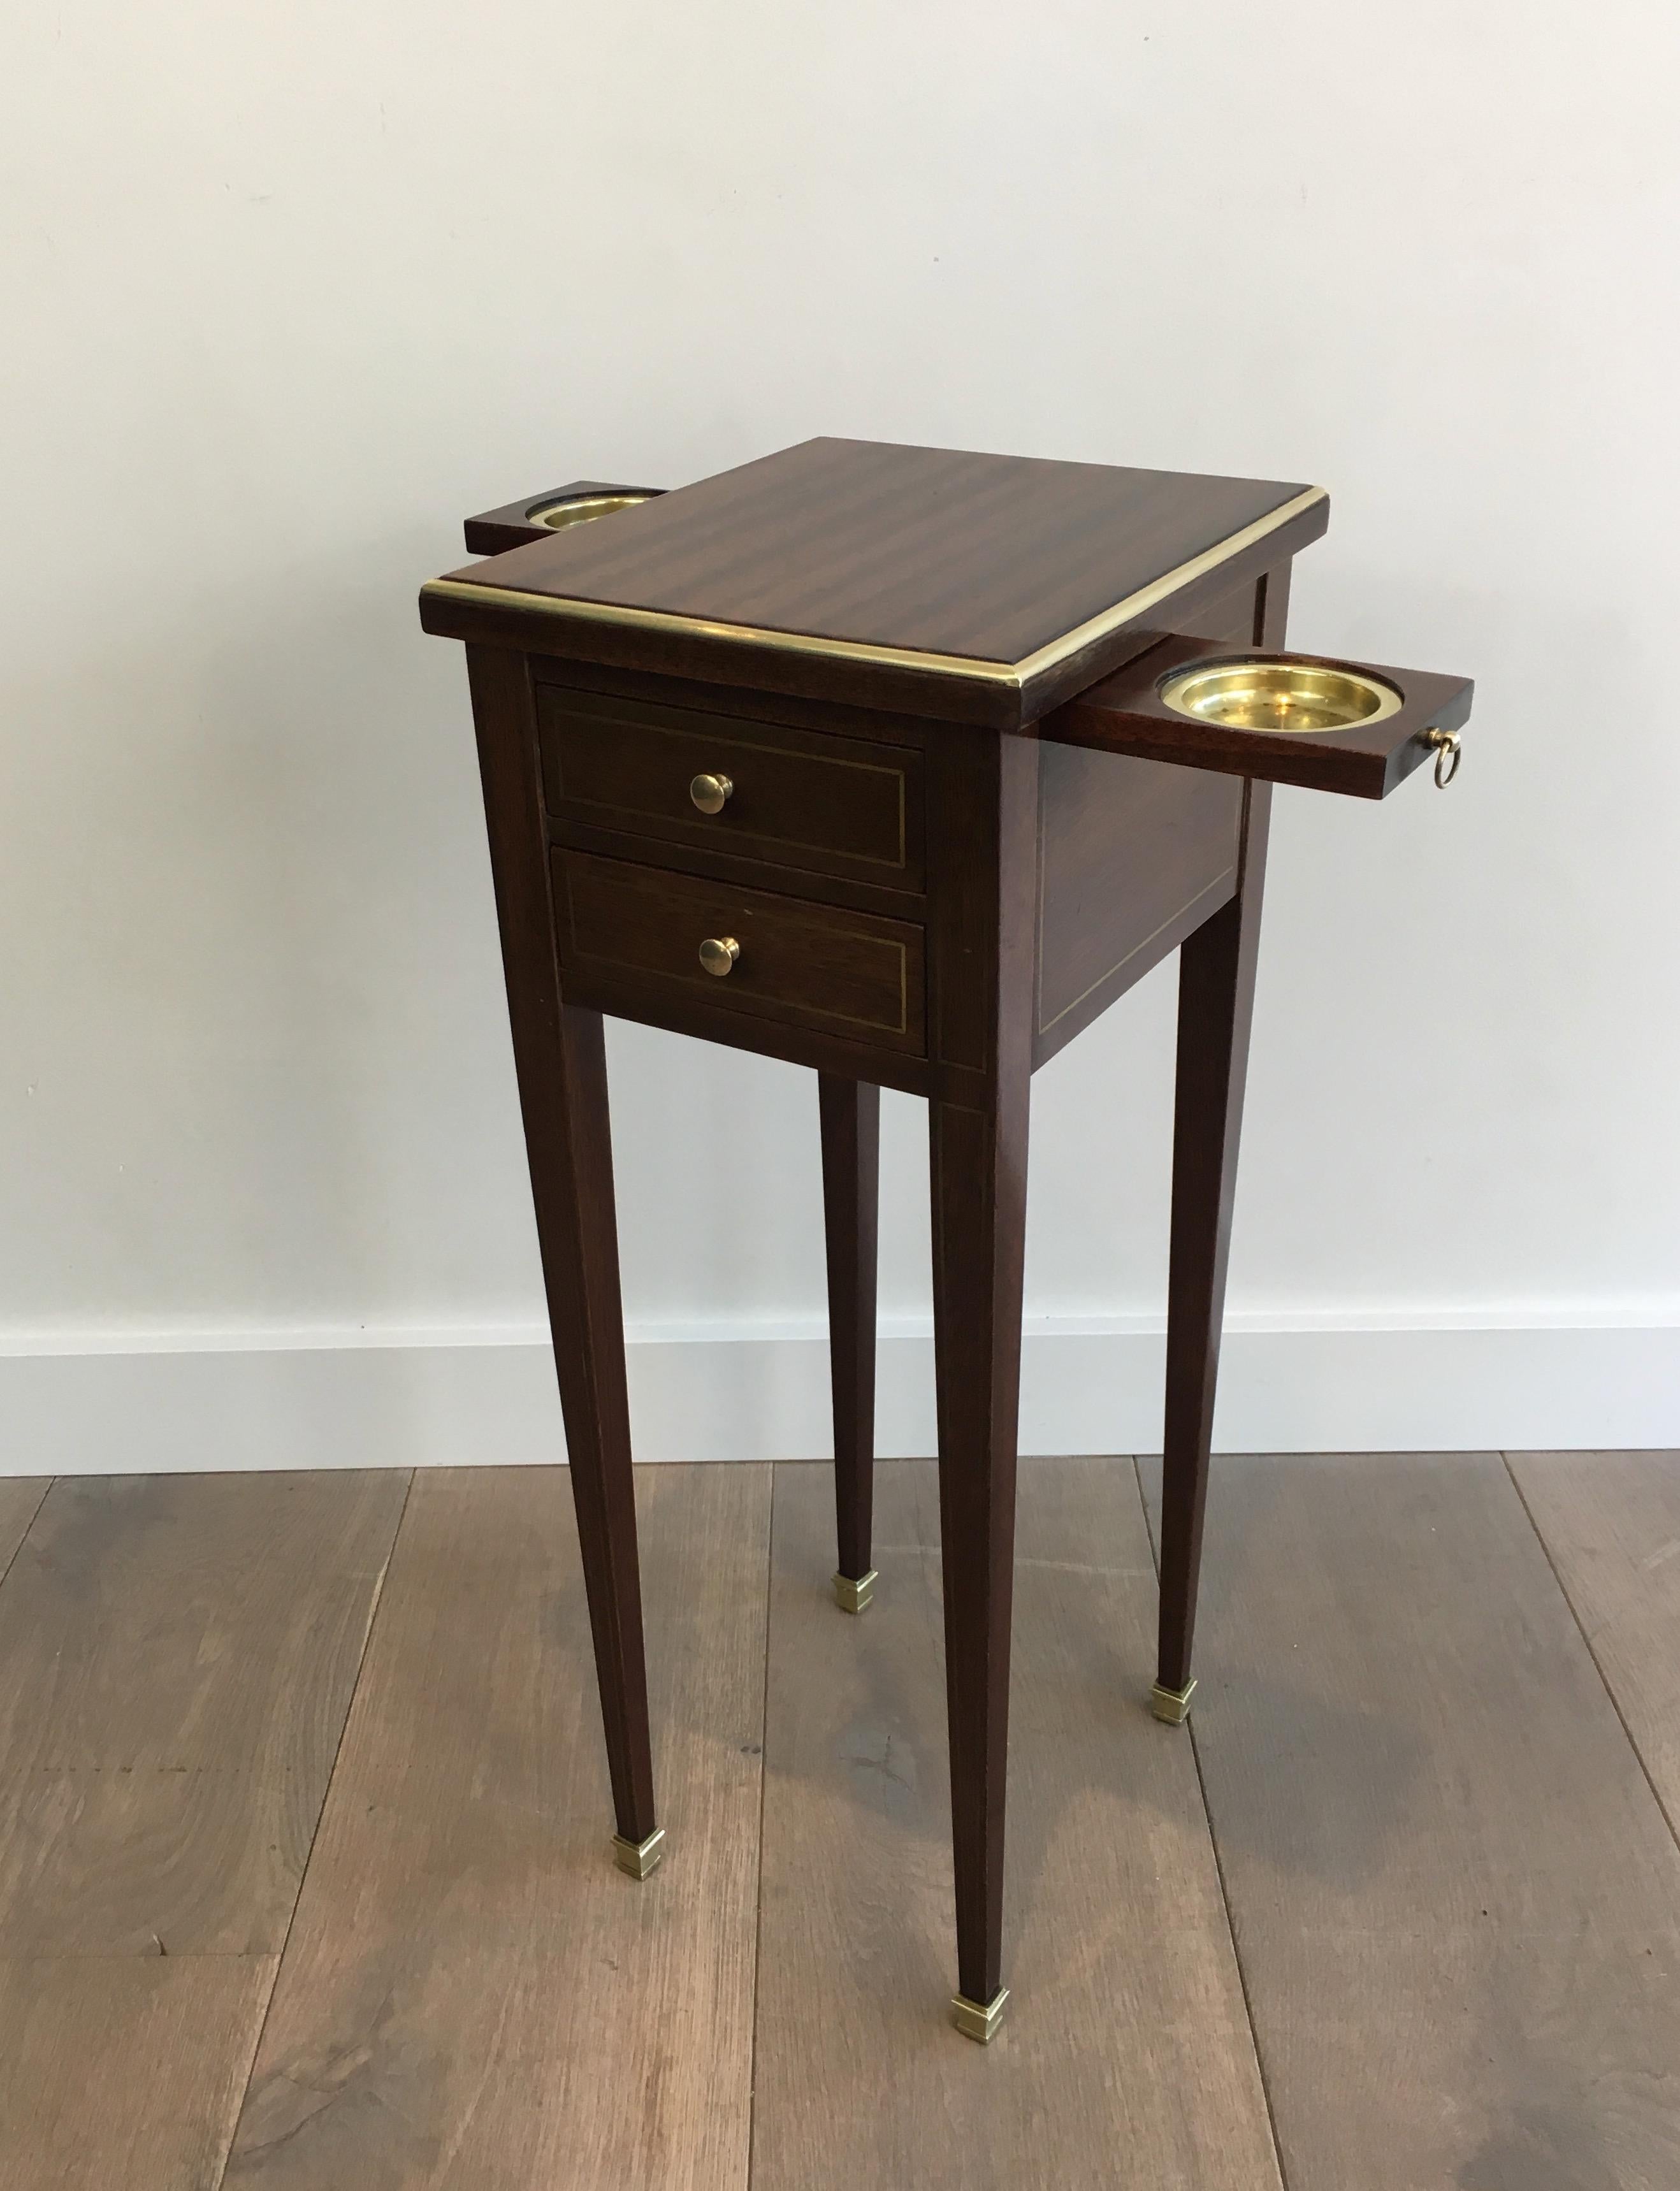 Unusual Neoclassical Small Drawers Table with Sliding Ashtrays 7